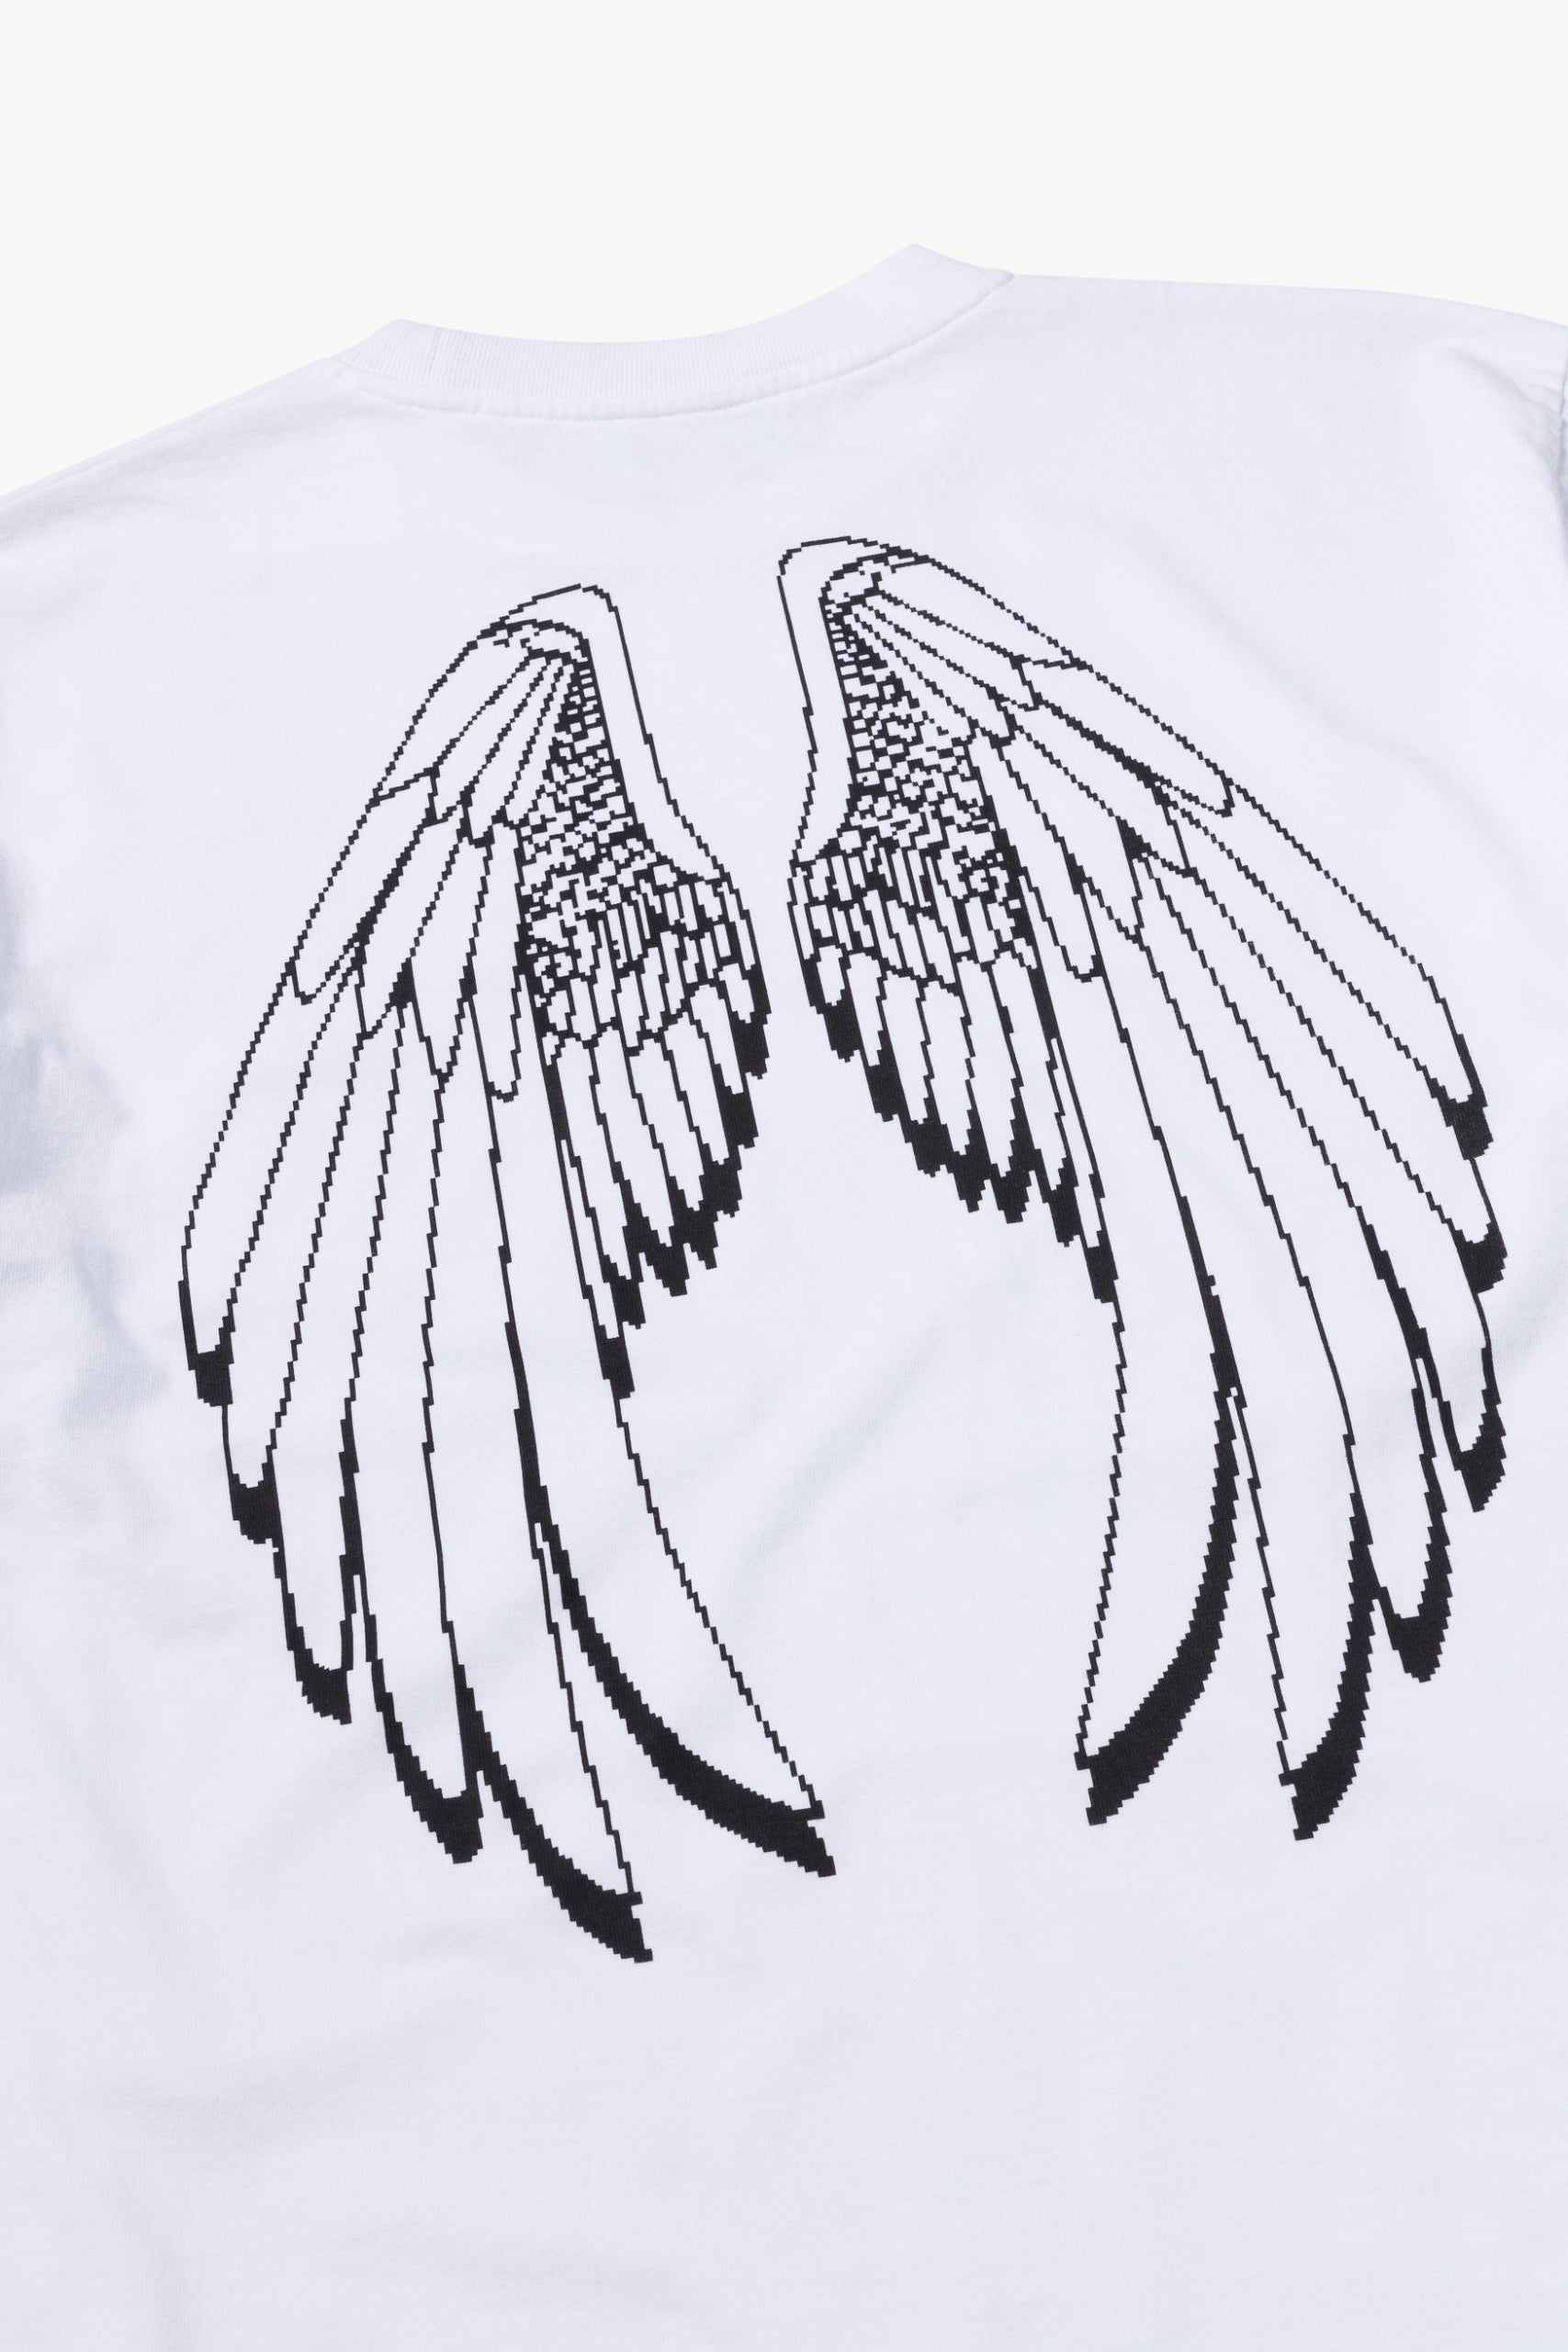 Load image into Gallery viewer, Angel SS Tee